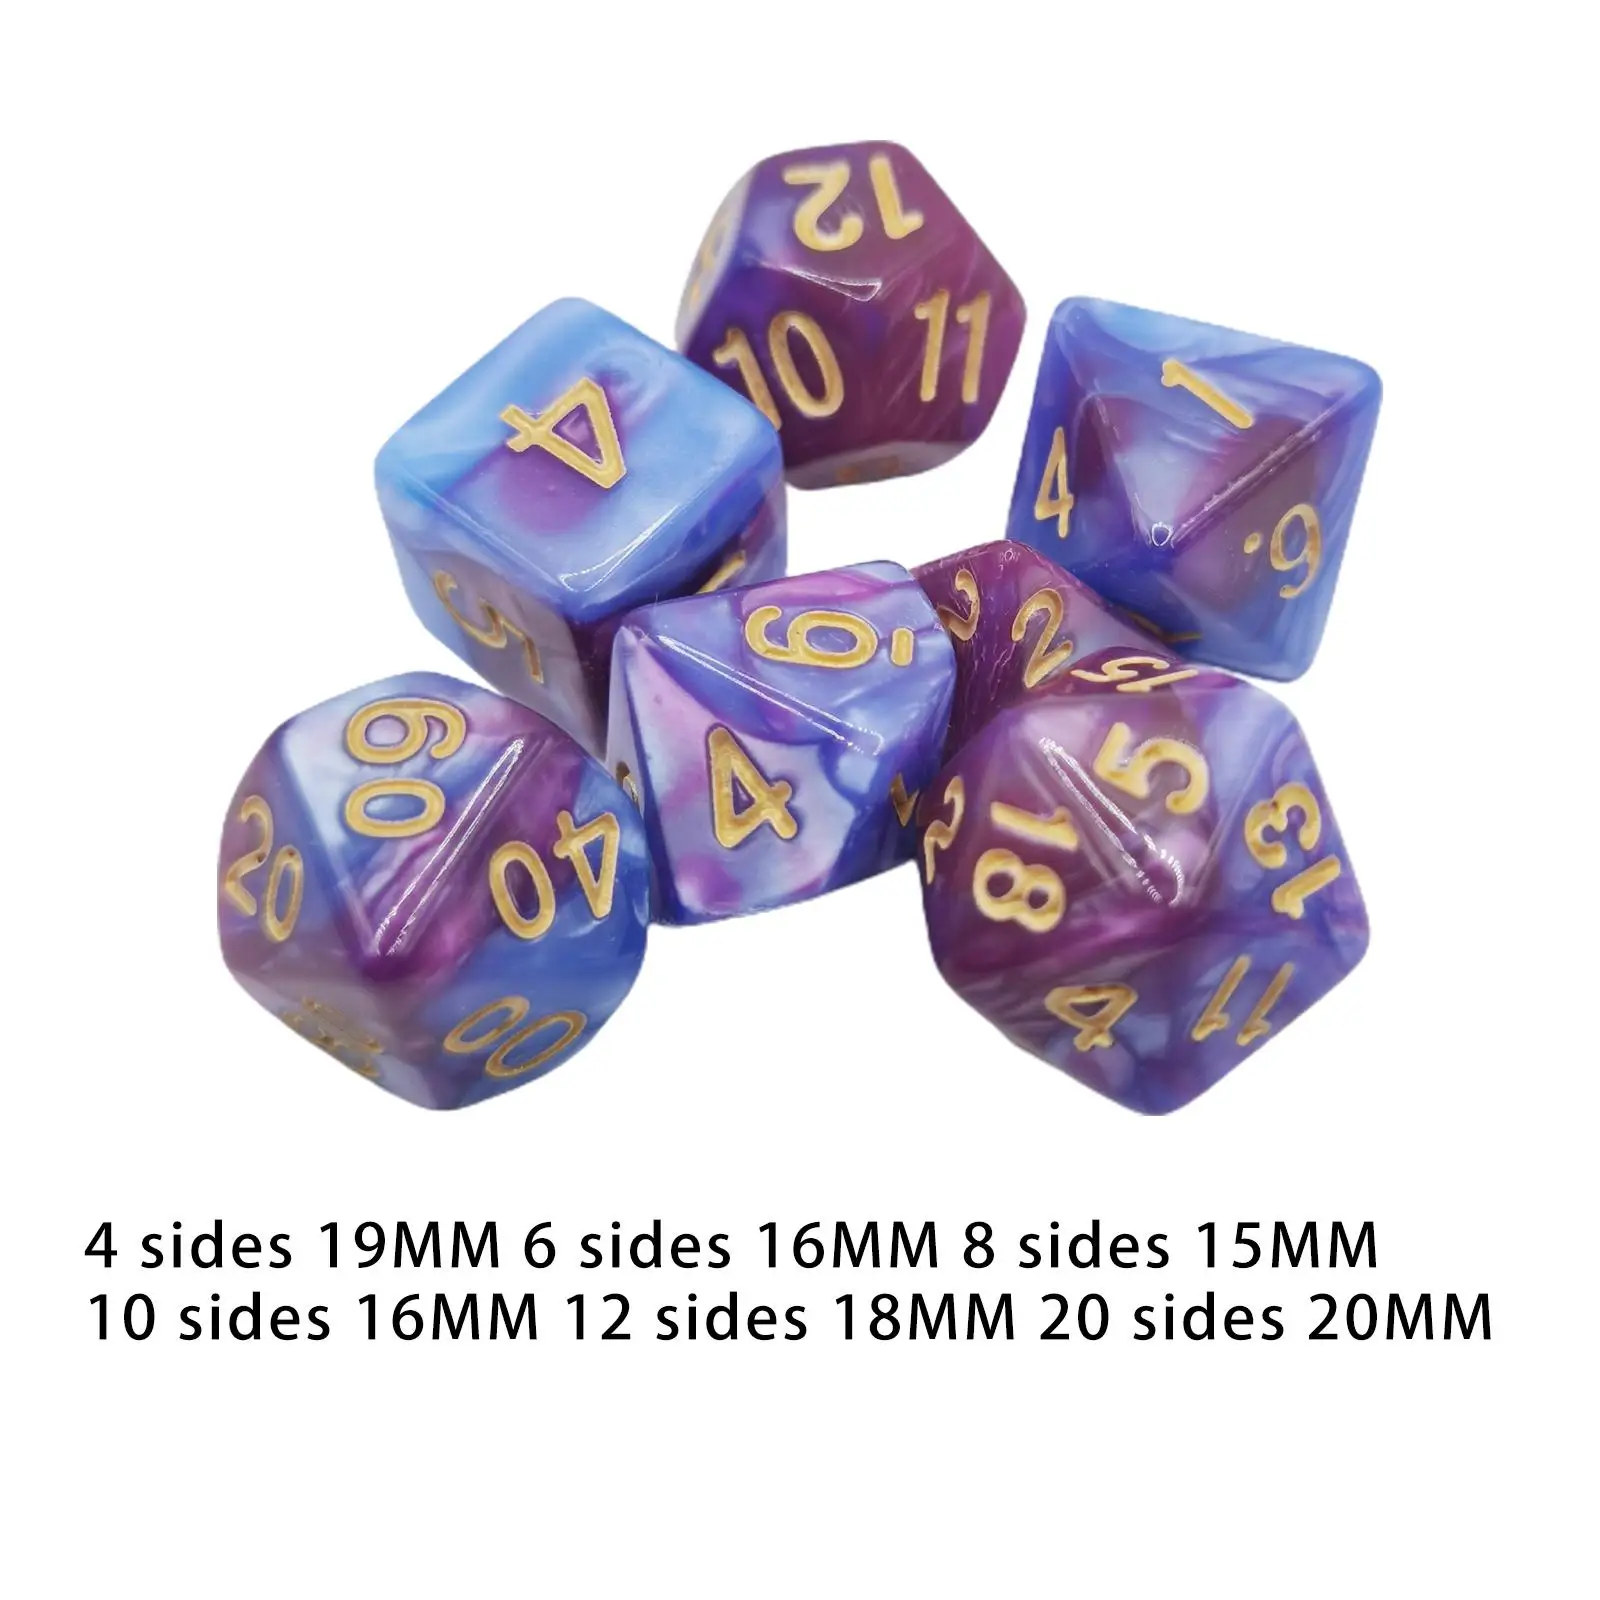 7 Pieces Polyhedral Dice Set D6 D4 D8 D10 D12 D20 Double Colors Round Corner for Role Playing Table Board Games Math Learning